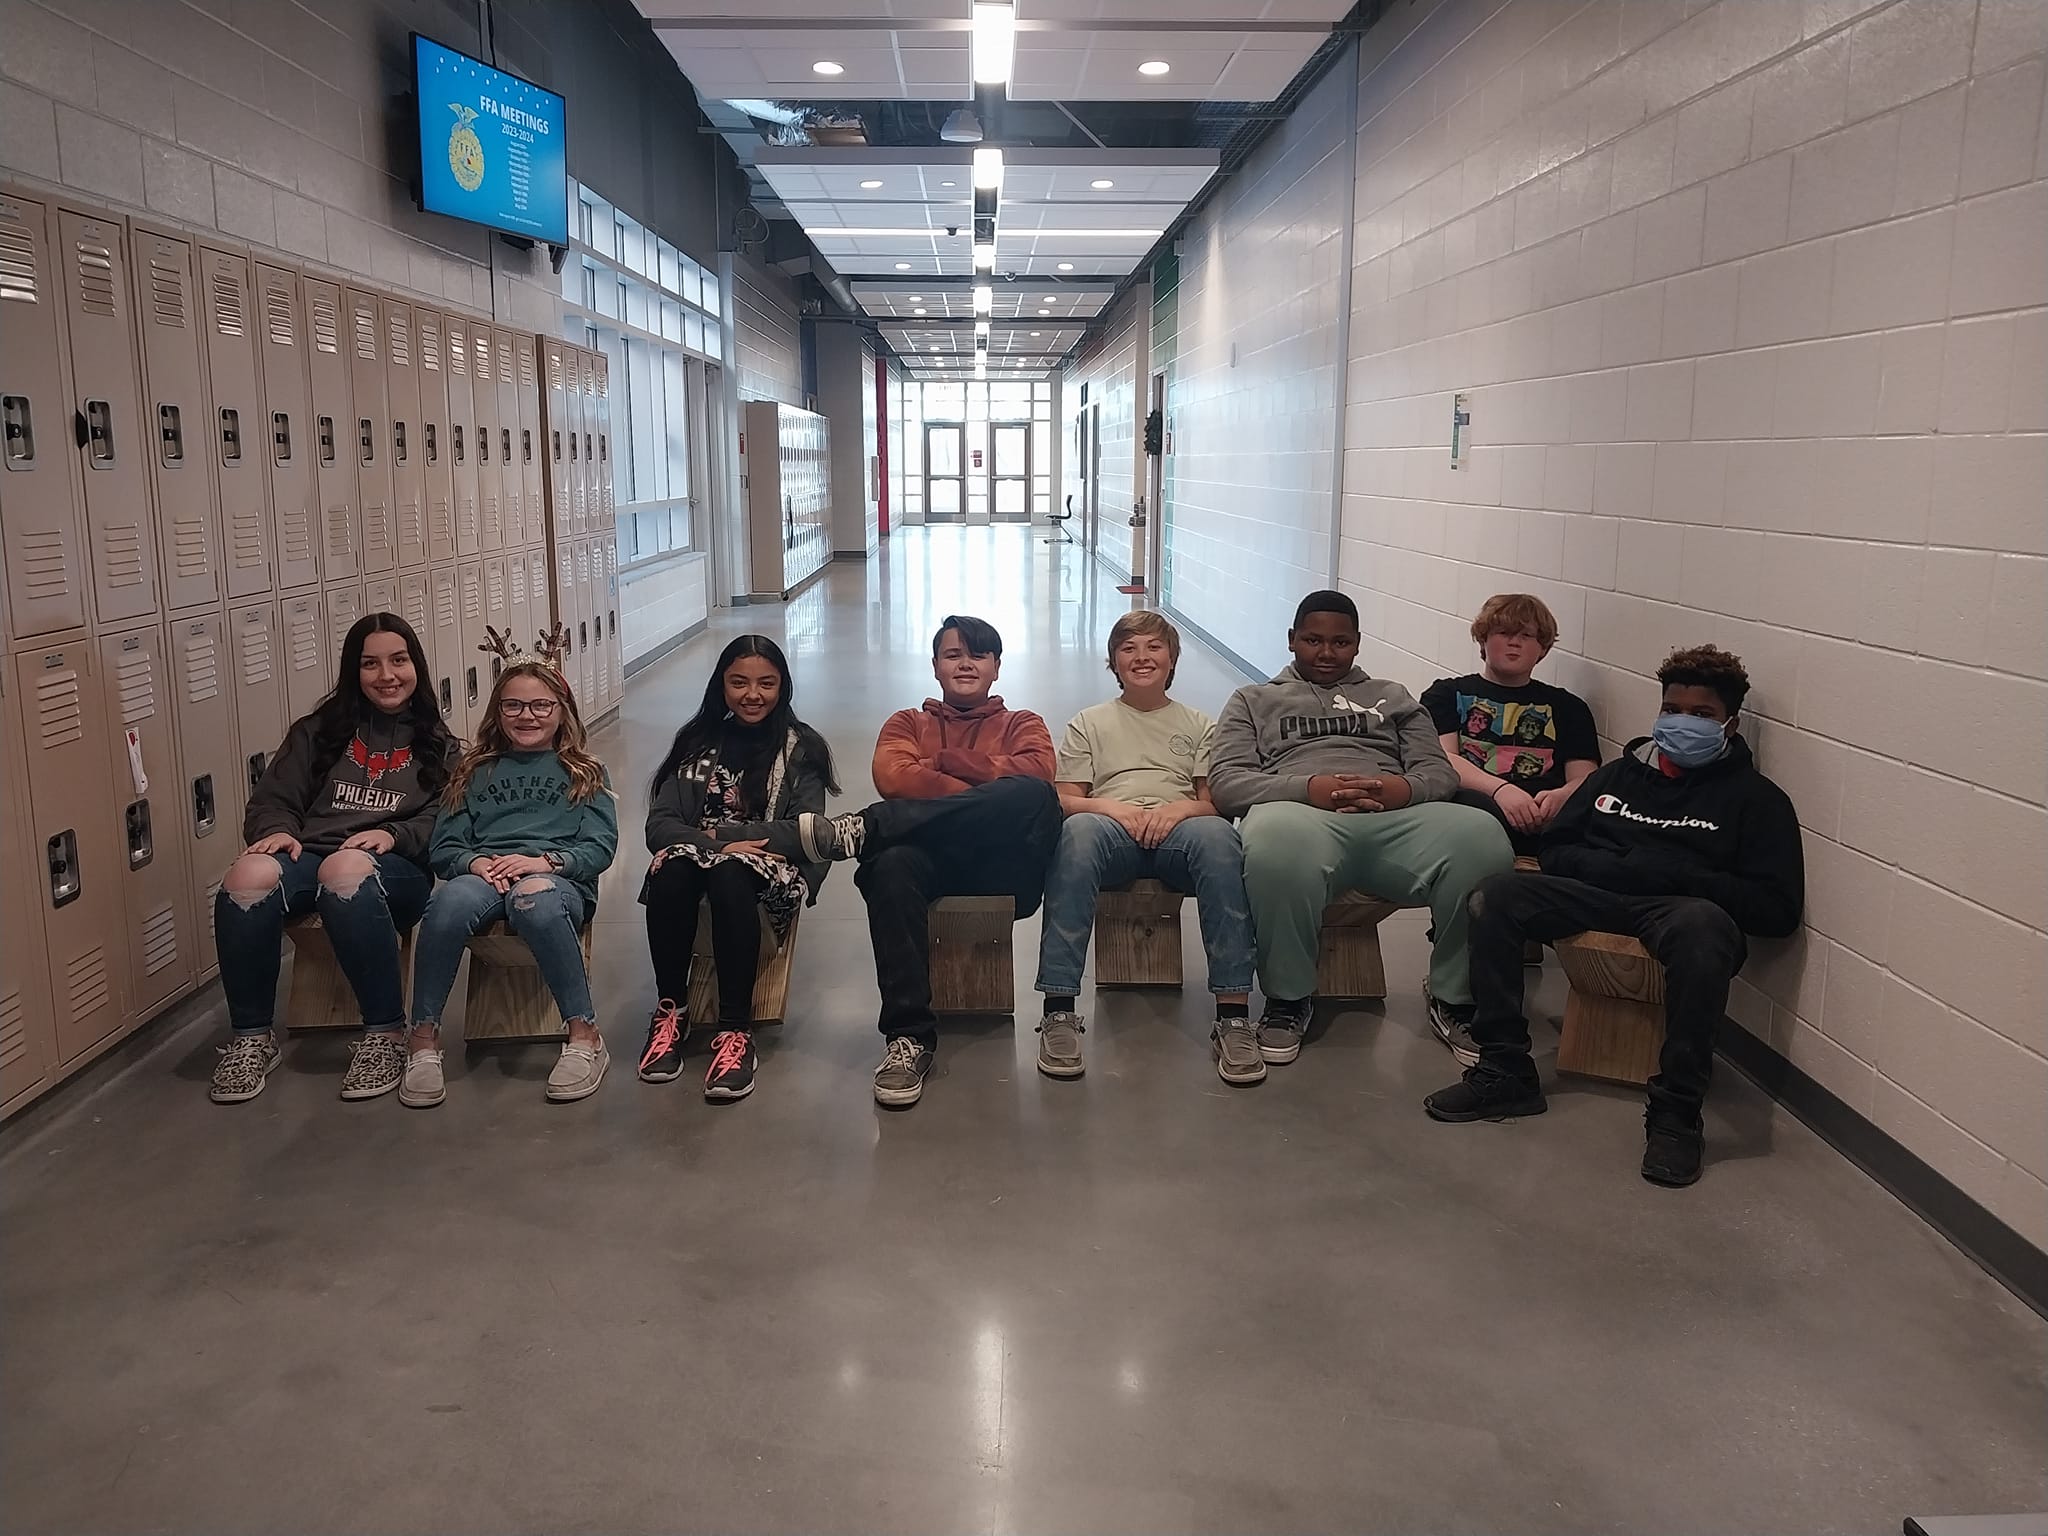 students sitting on handmade chairs in the hallway